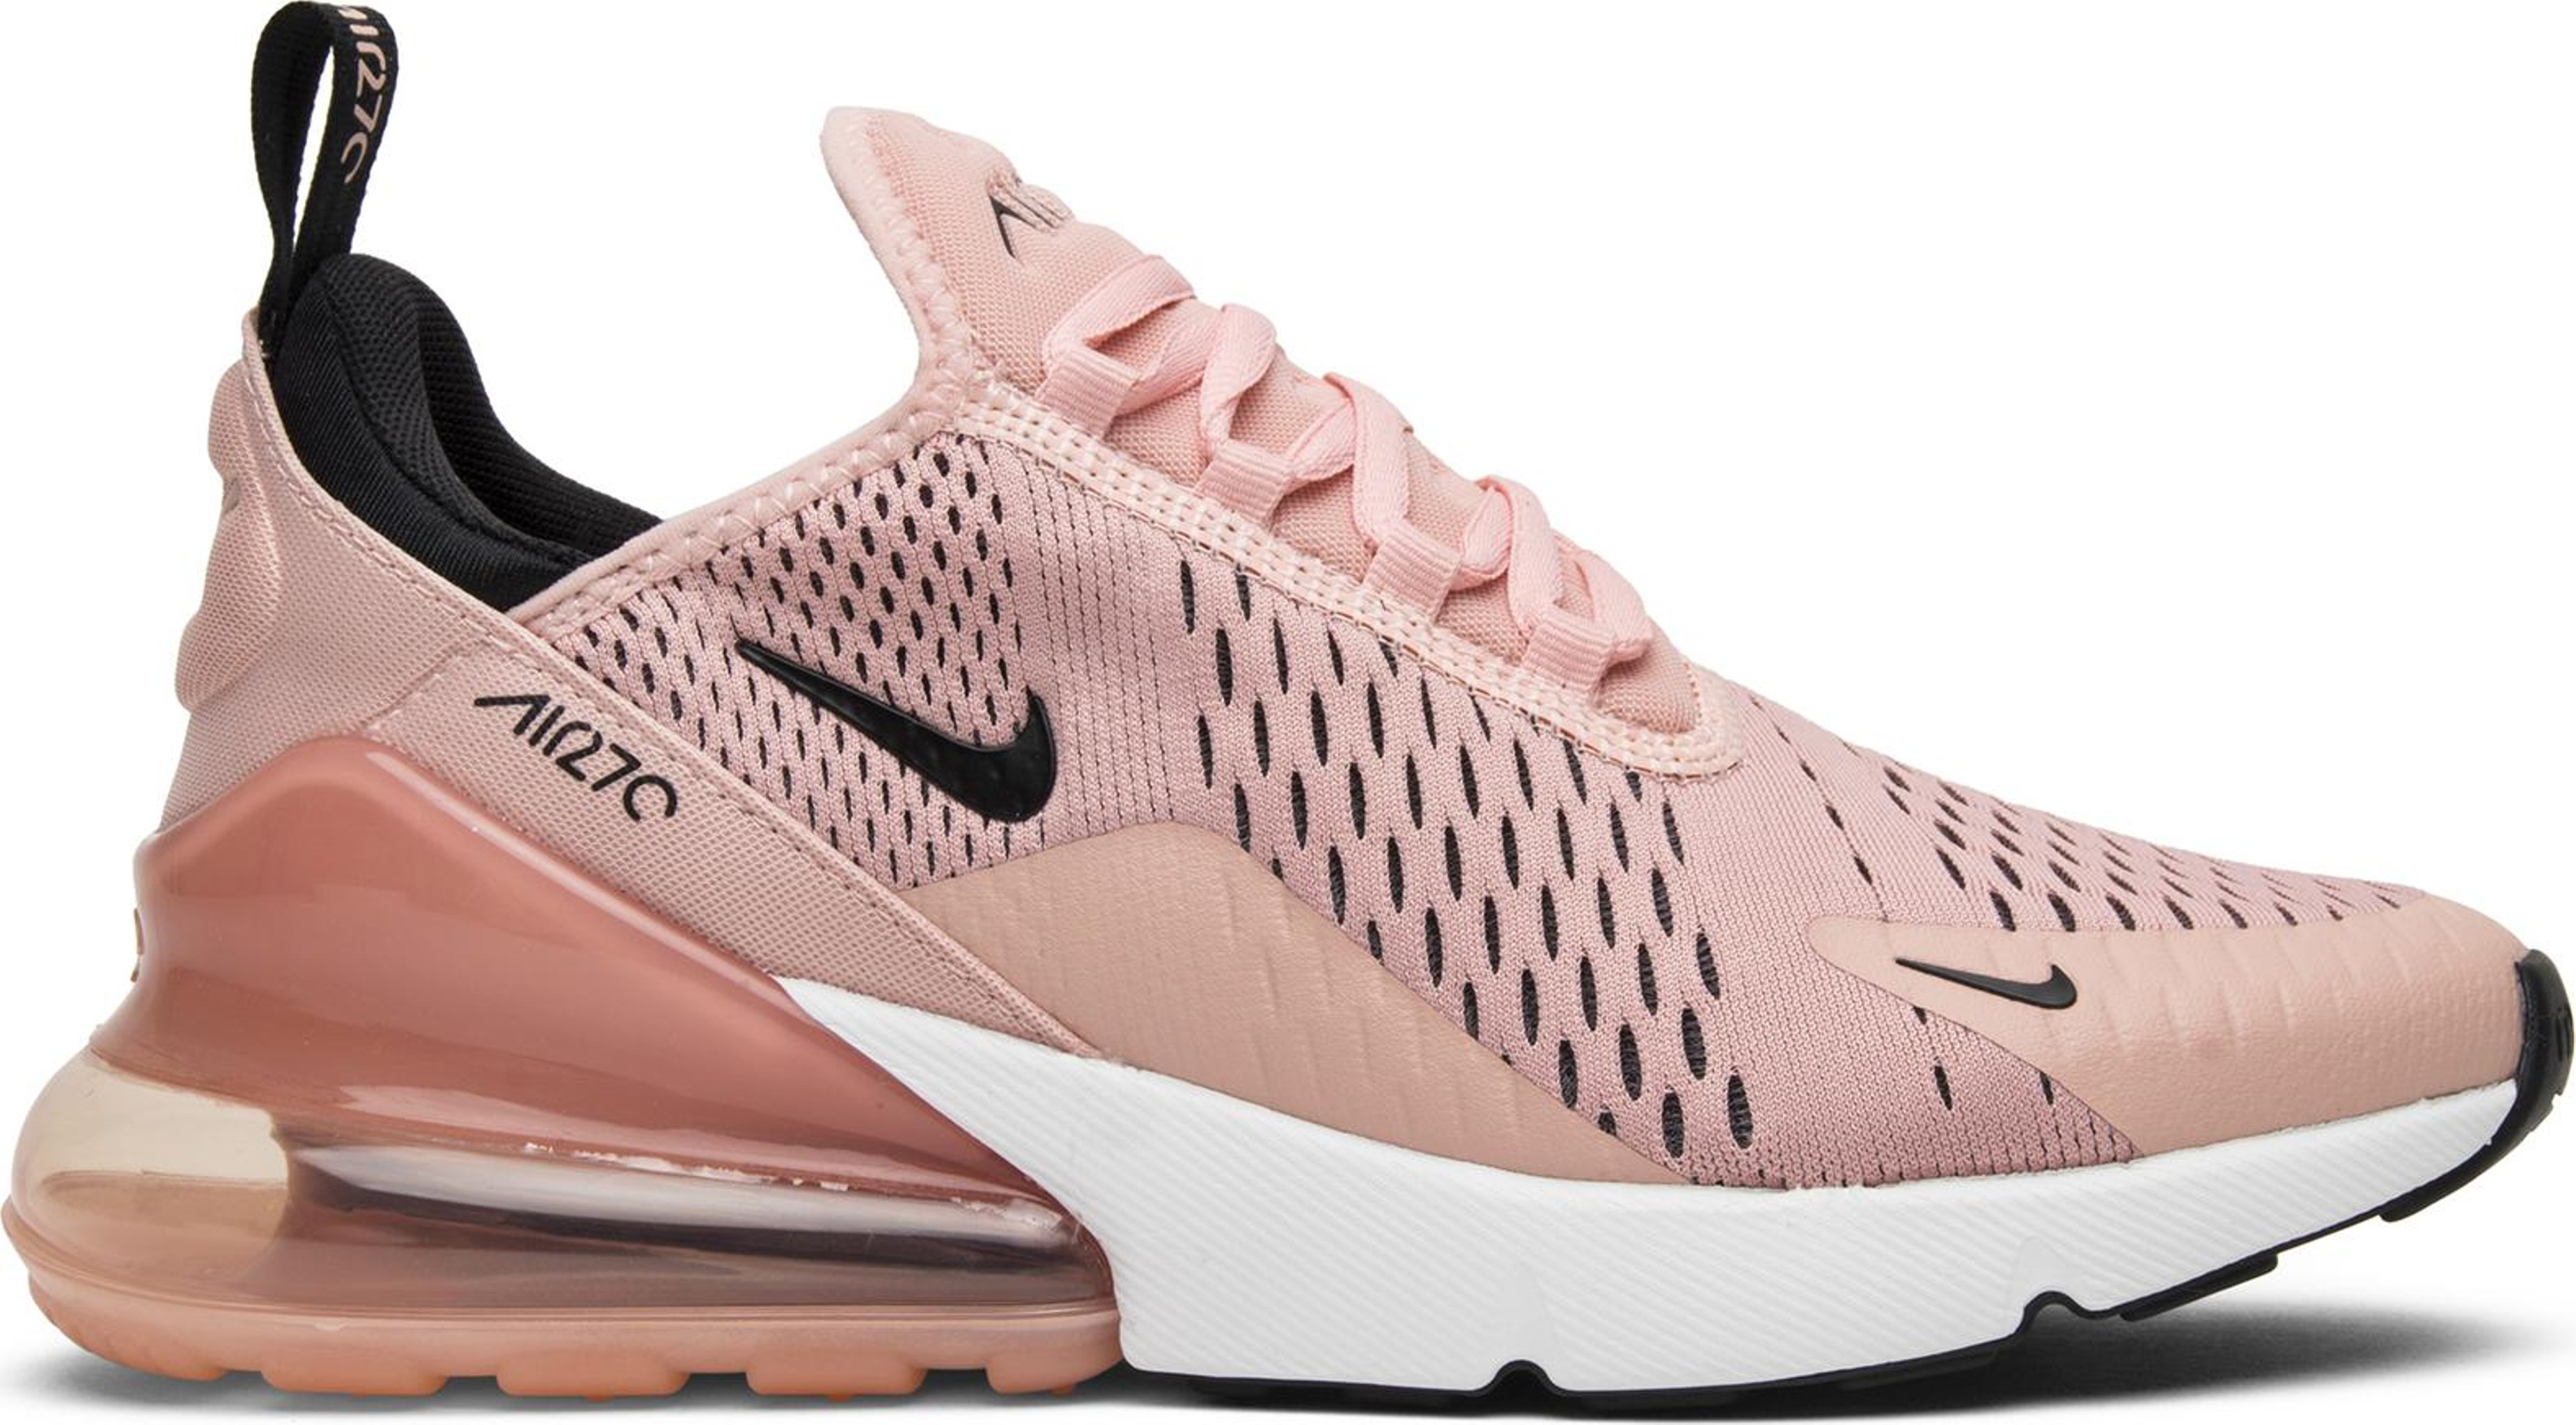 Buy Wmns Air Max 270 Coral Stardust Ah6789 600 Goat